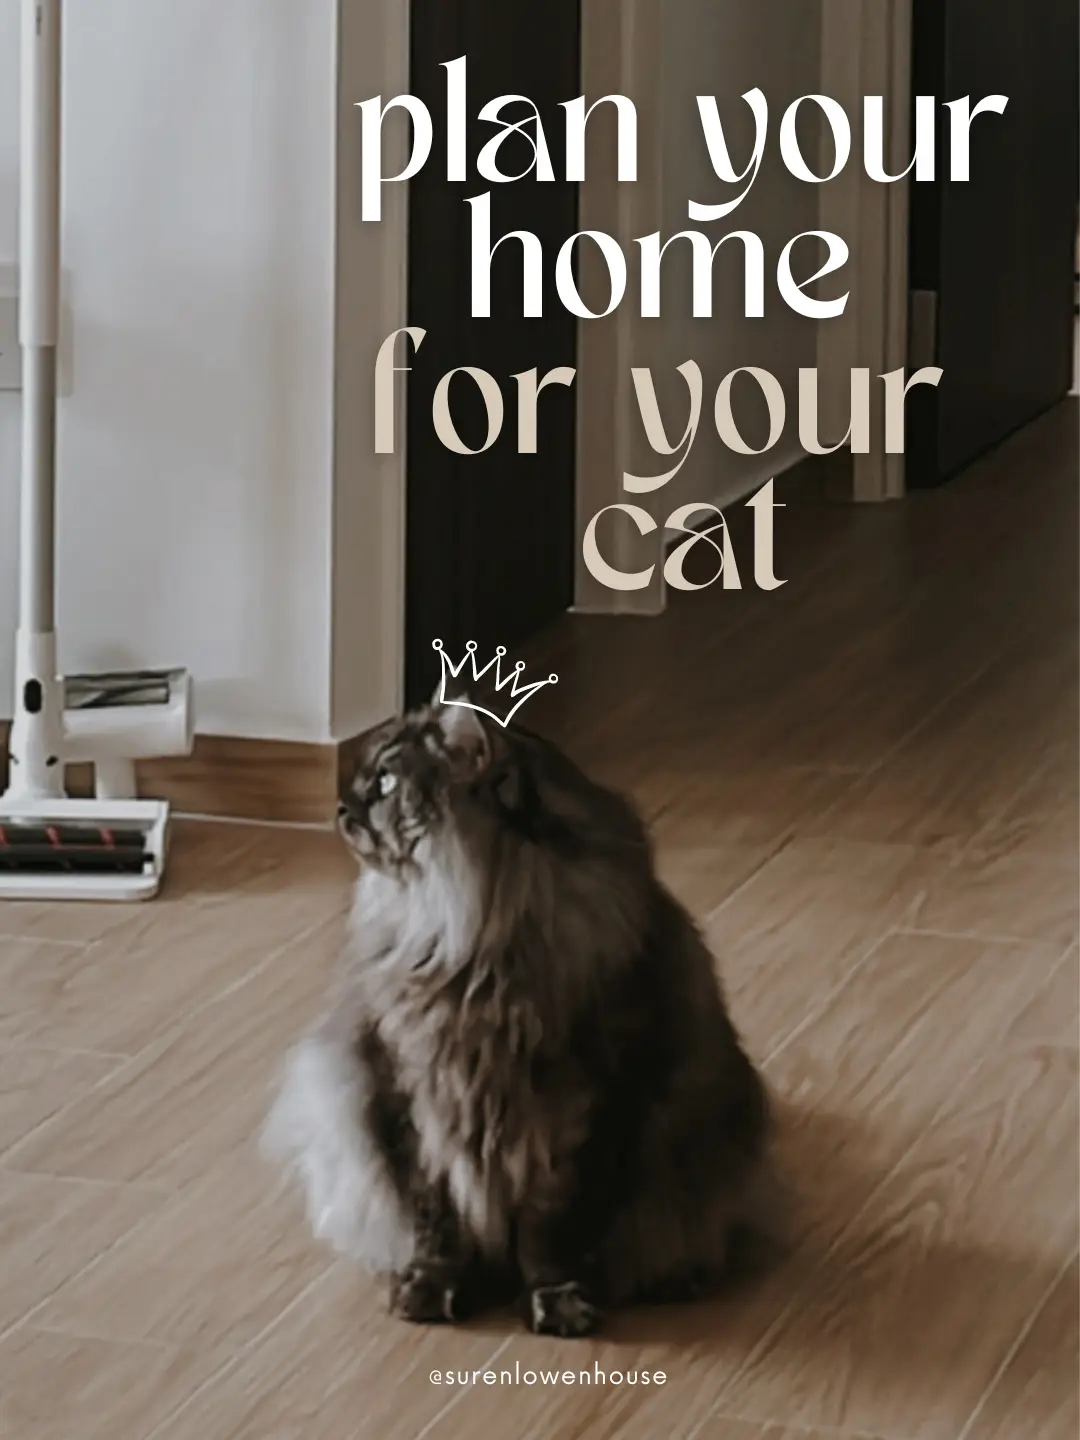 Tips for Grooming Your Cat at Home - Lemon8 Search